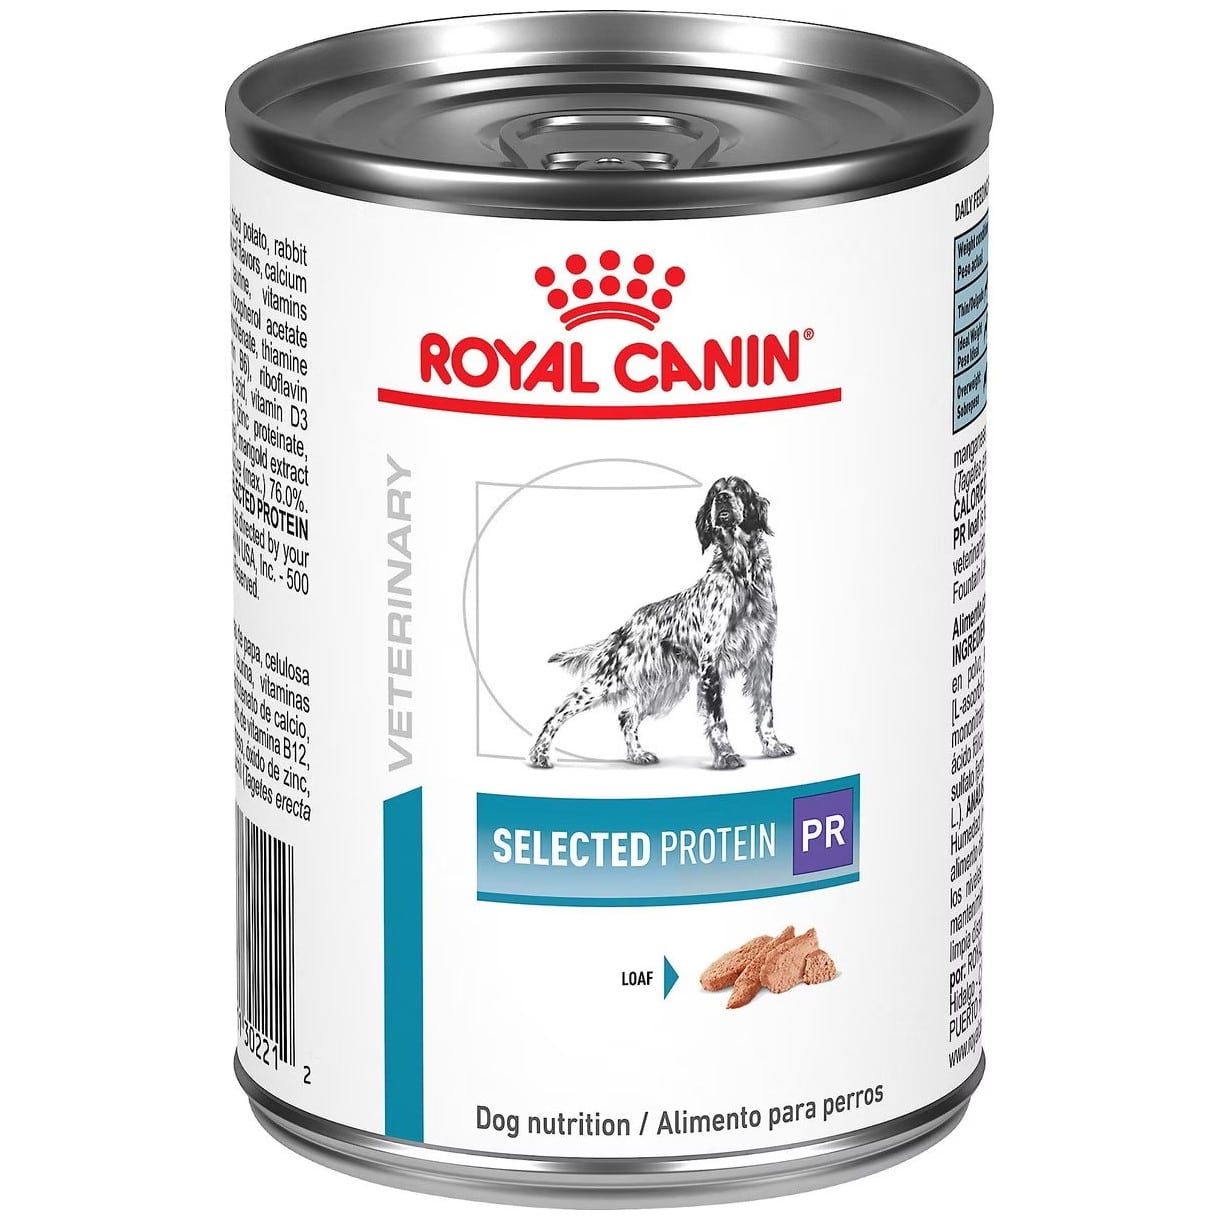 Royal Canin Veterinary Diet Adult Selected Protein PR Canned Dog Food